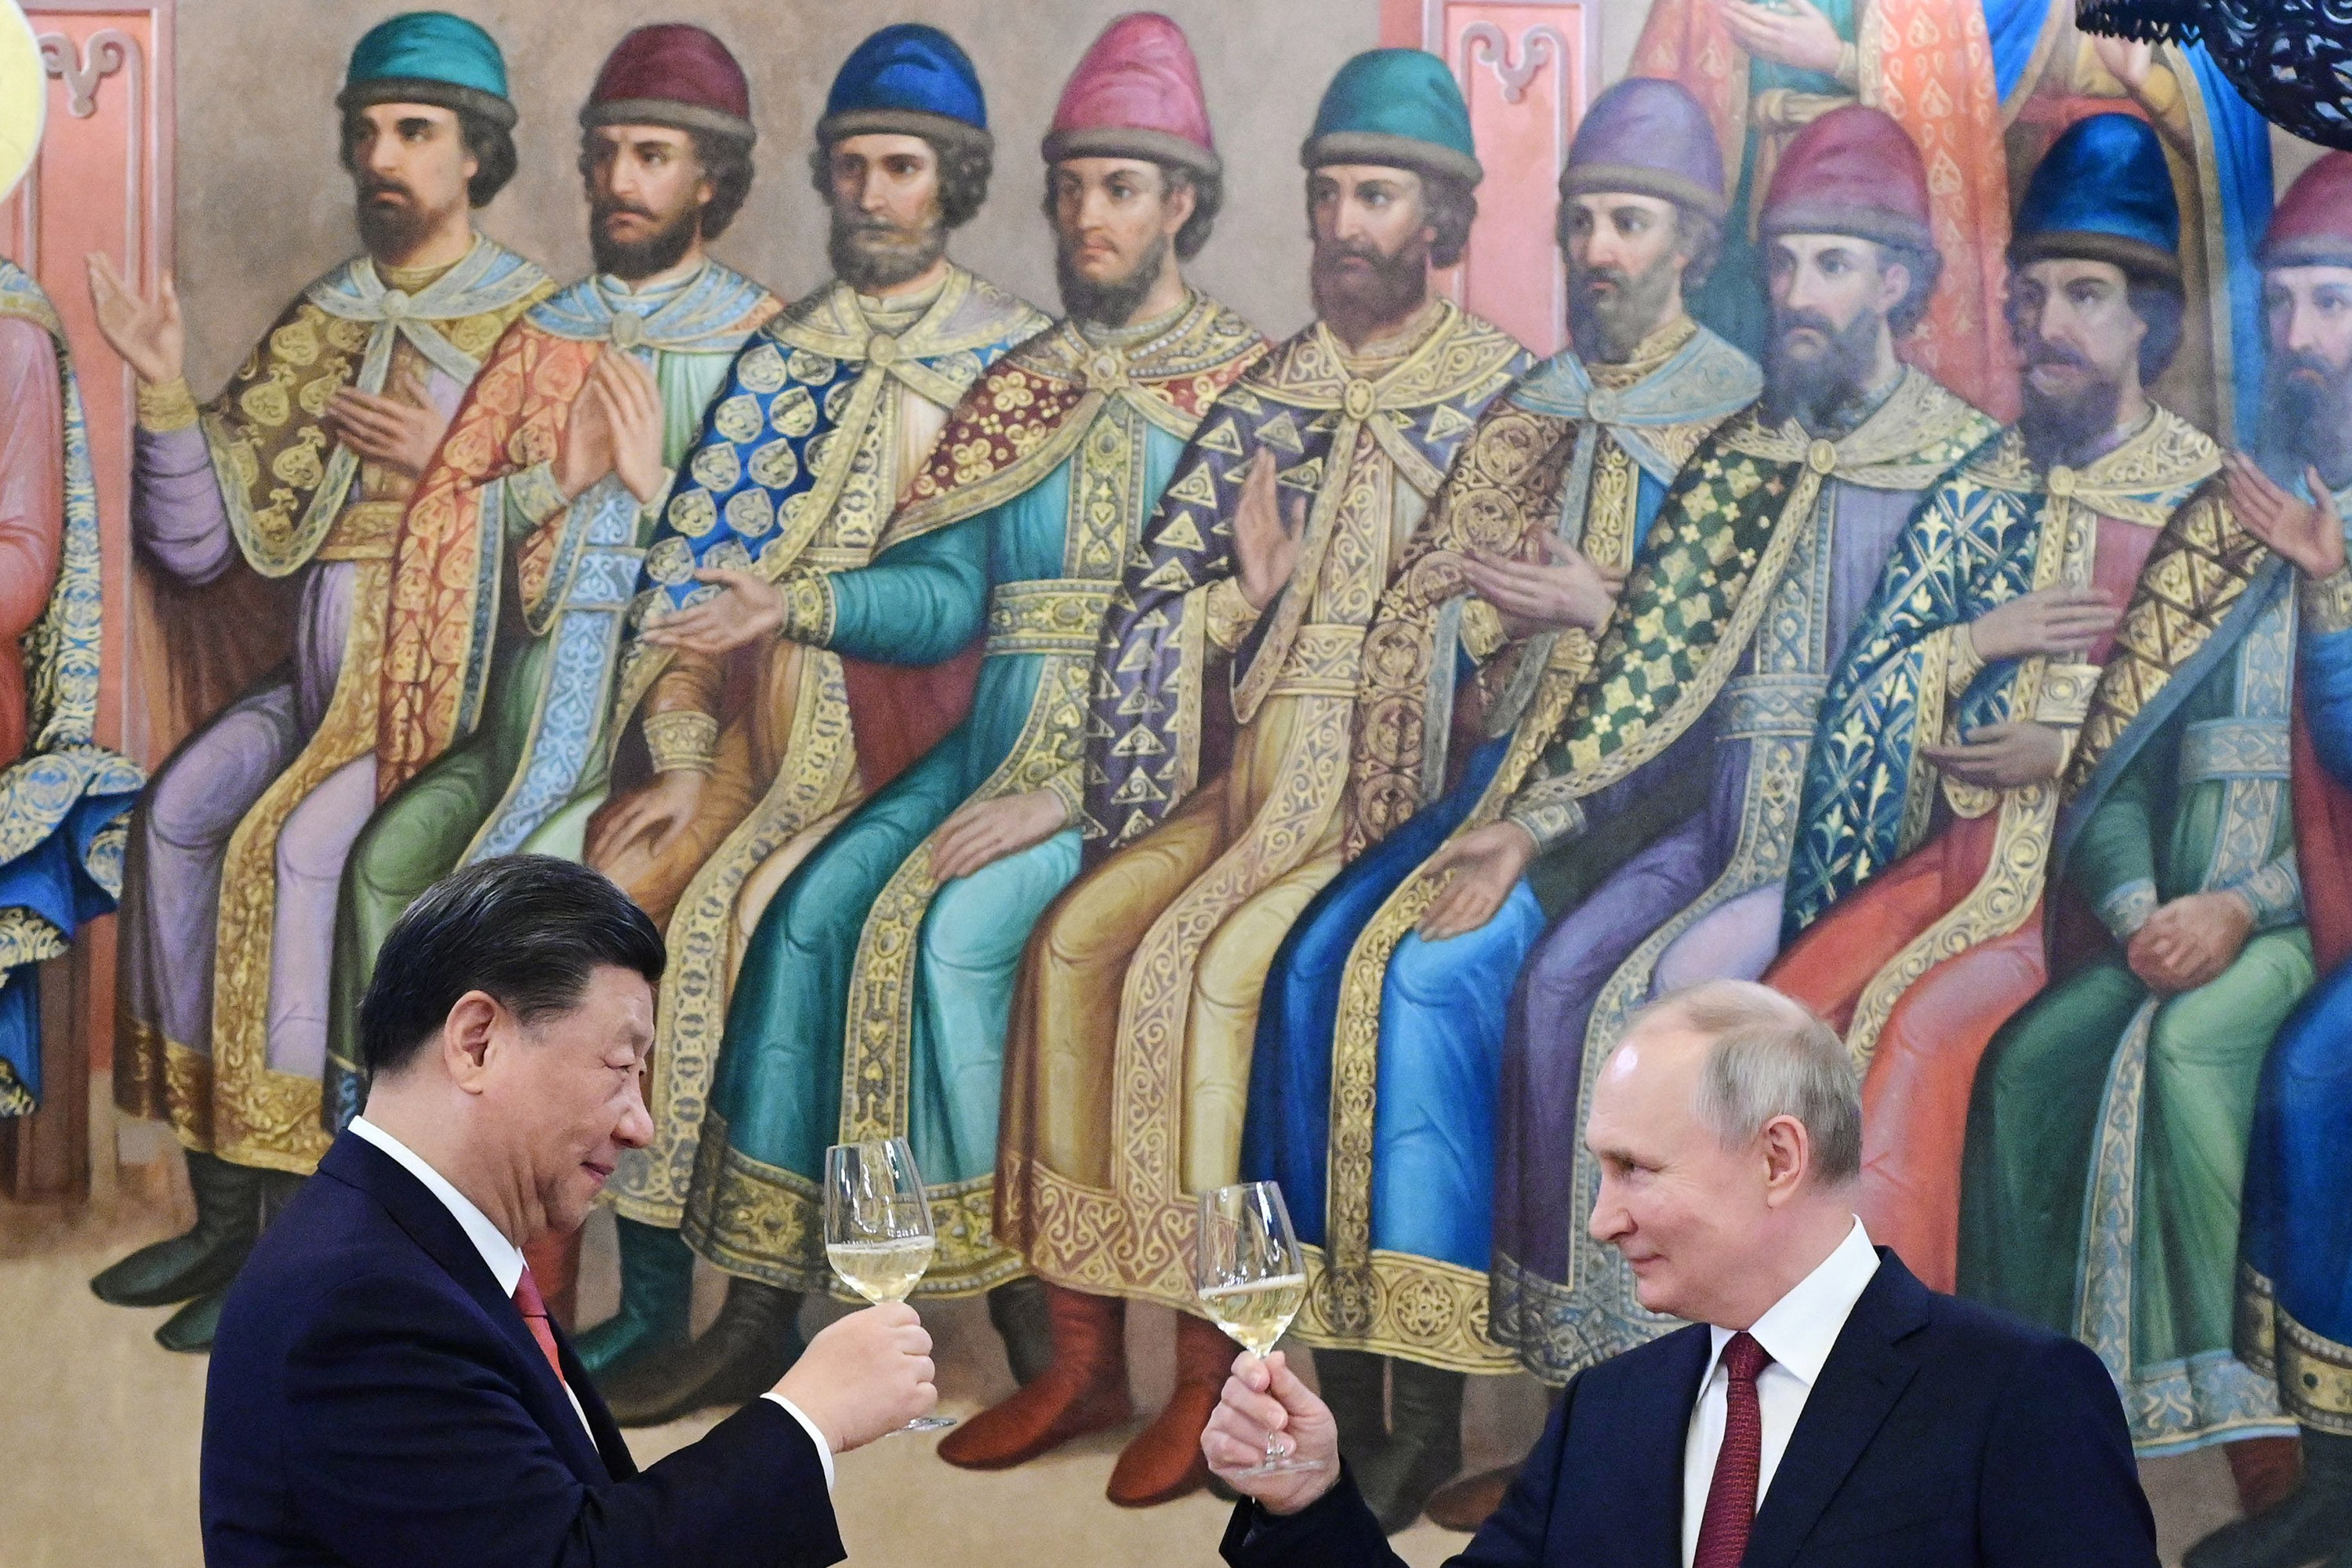 Russian President Vladimir Putin (right) and President Xi Jinping make a toast during a reception following their talks at the Kremlin in Moscow on March 21. Despite the public displays of goodwill and friendship between the Russian and Chinese governments, there are still deep distrust and hard feelings dating back more than a century between the two sides. Photo: AFP